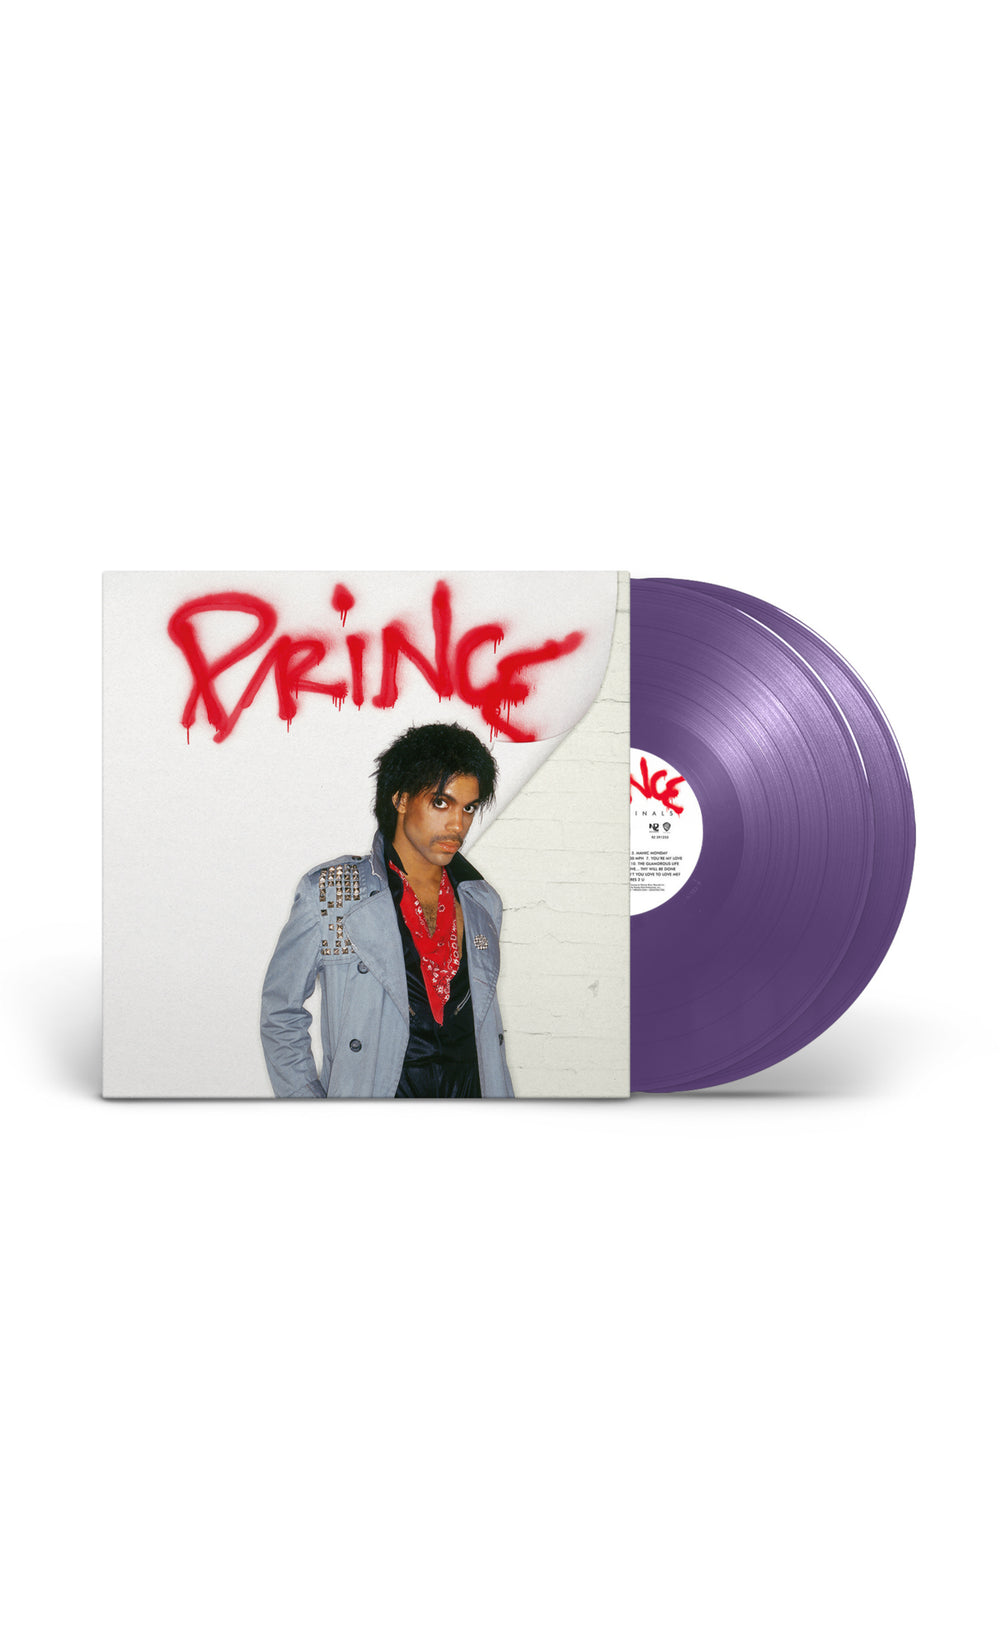 Prince Originals DELUXE CD+2LP (Limited Edition one-off run)  Released July 19th 2019